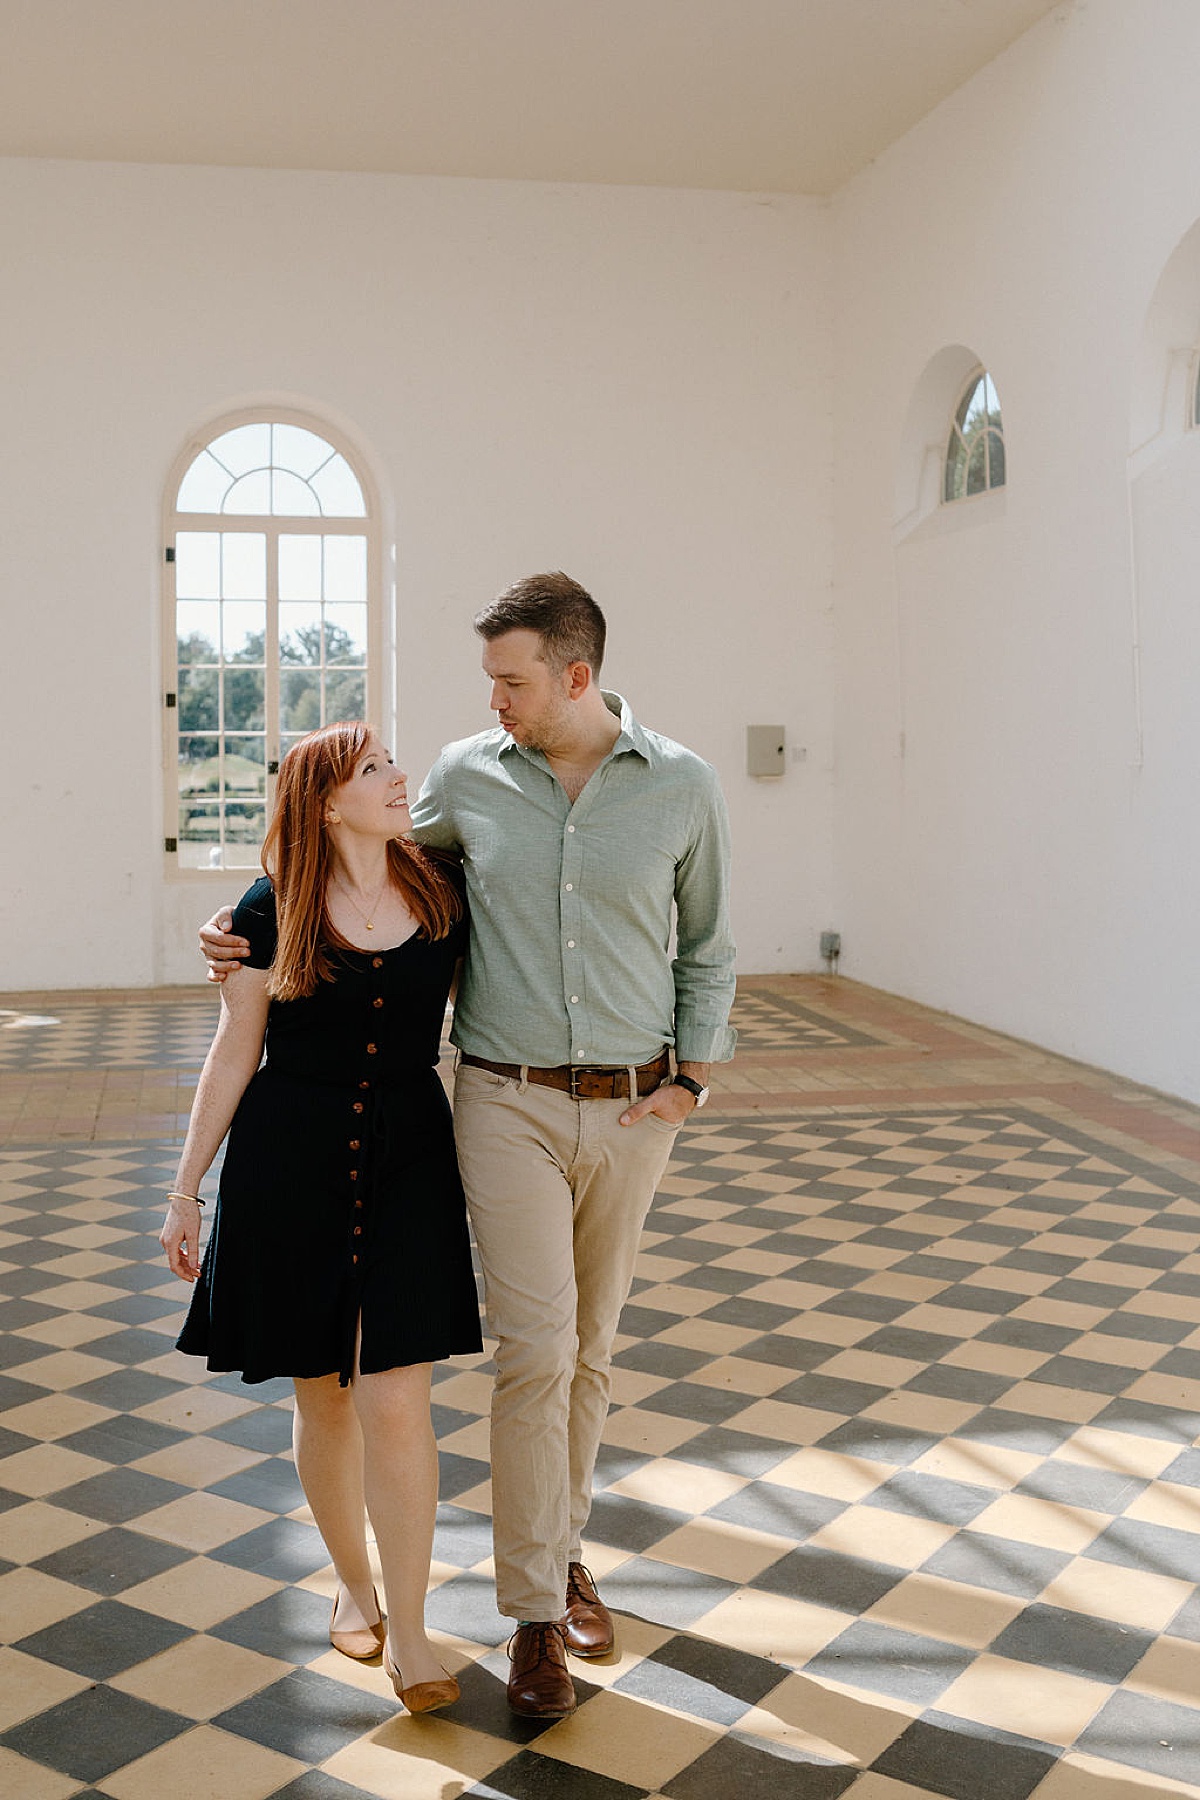 couple walk through garden pavilion with tiled floor during classy engagement shoot by Indigo Lace Collective